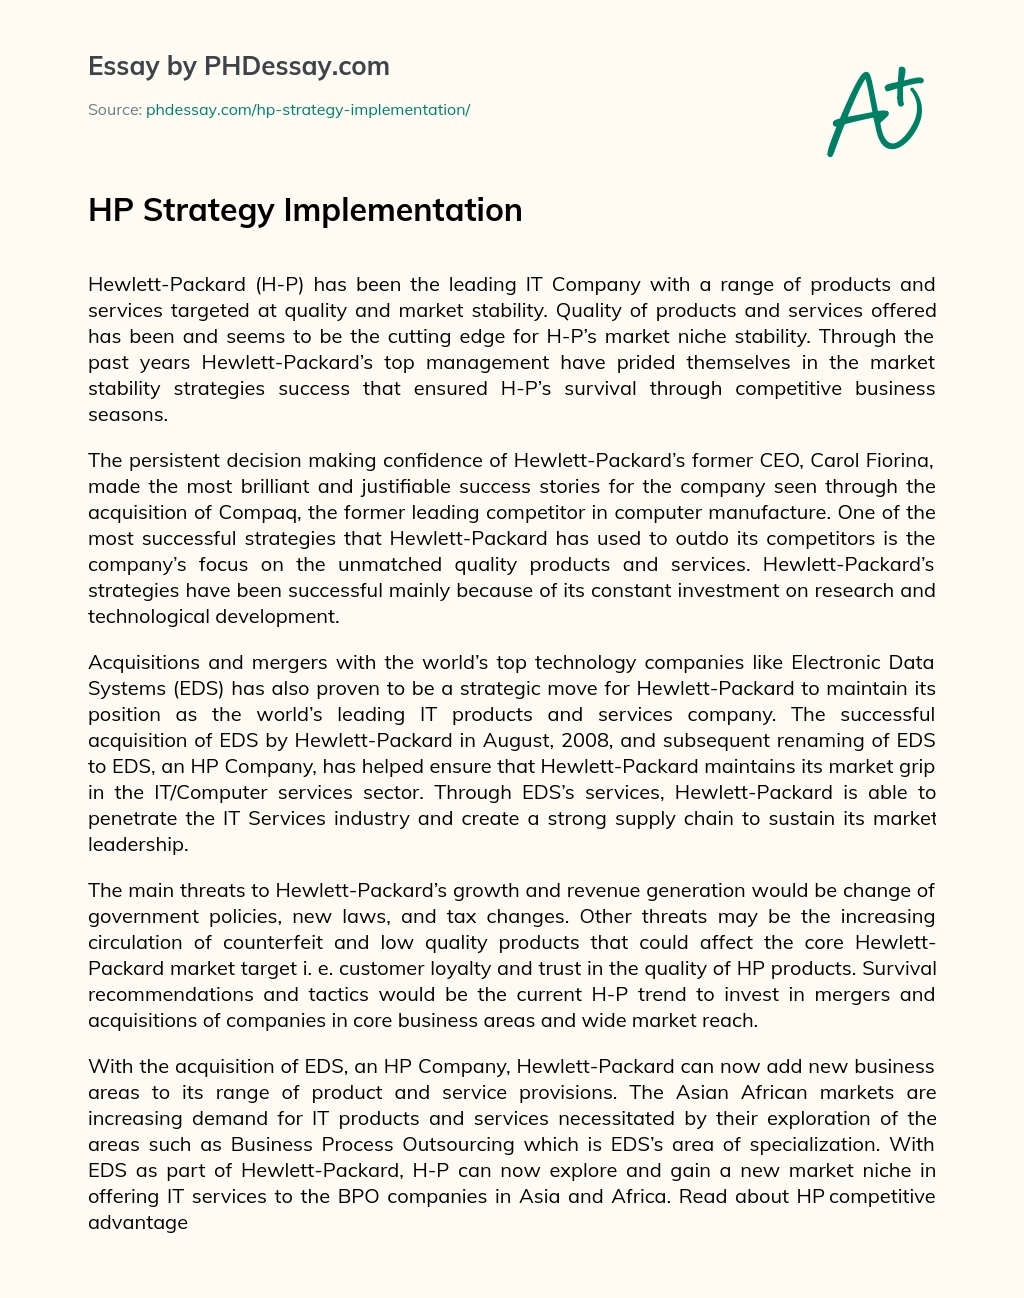 HP Strategy Implementation essay